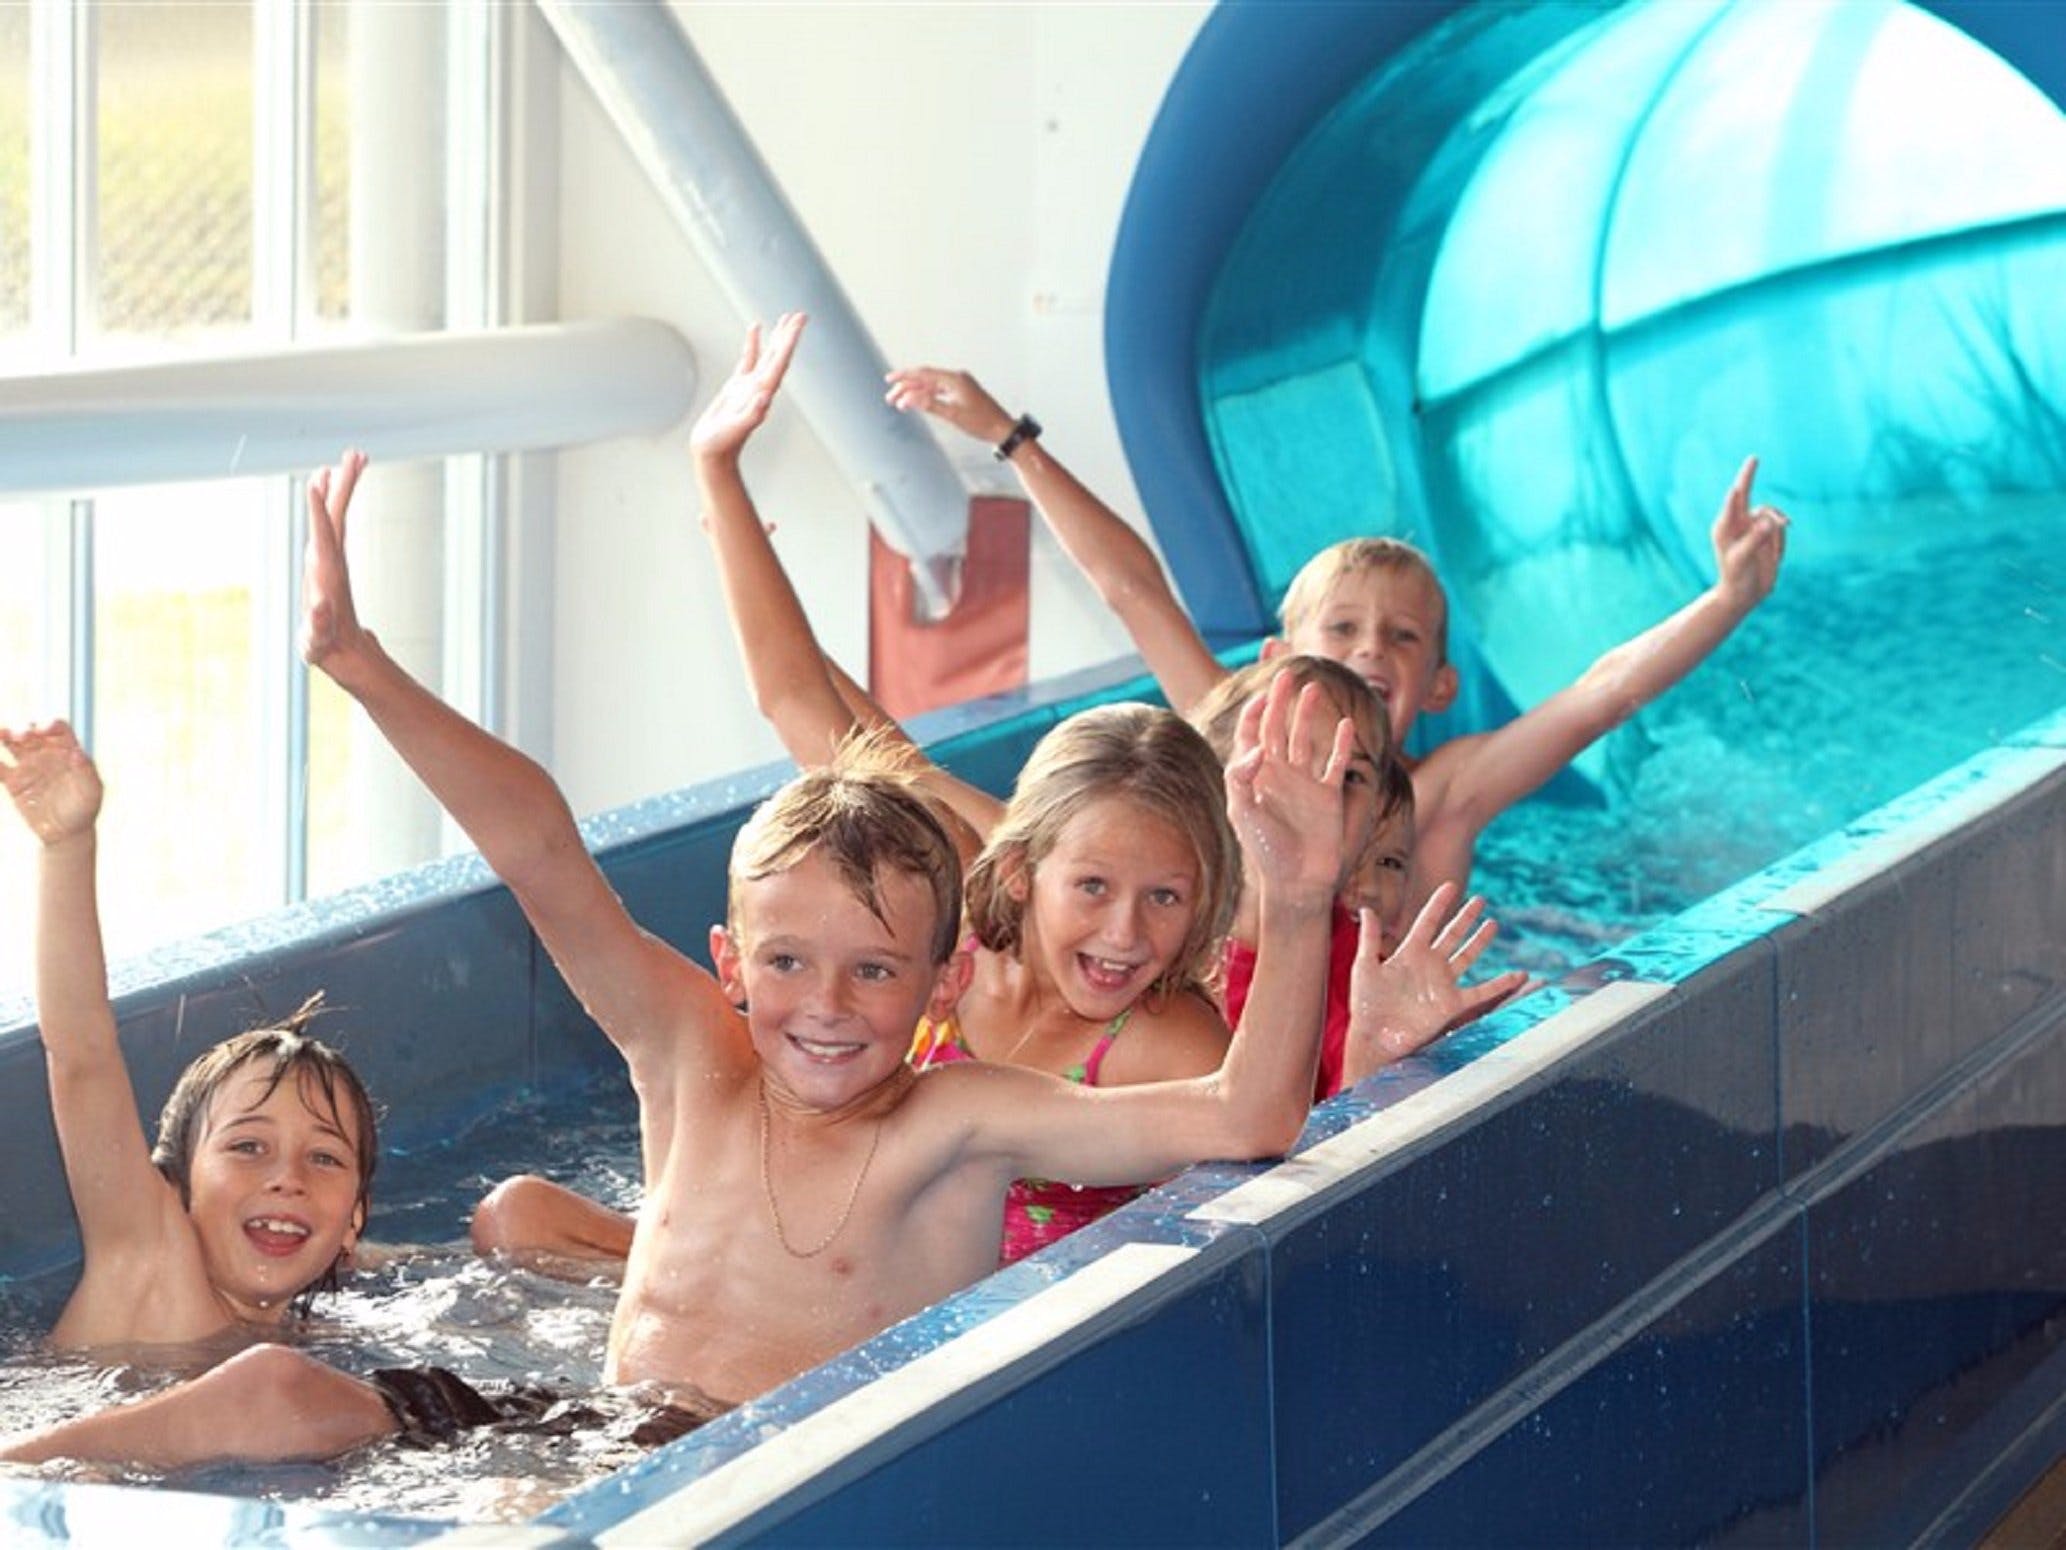 Bay and Basin Leisure Centre - Geraldton Accommodation